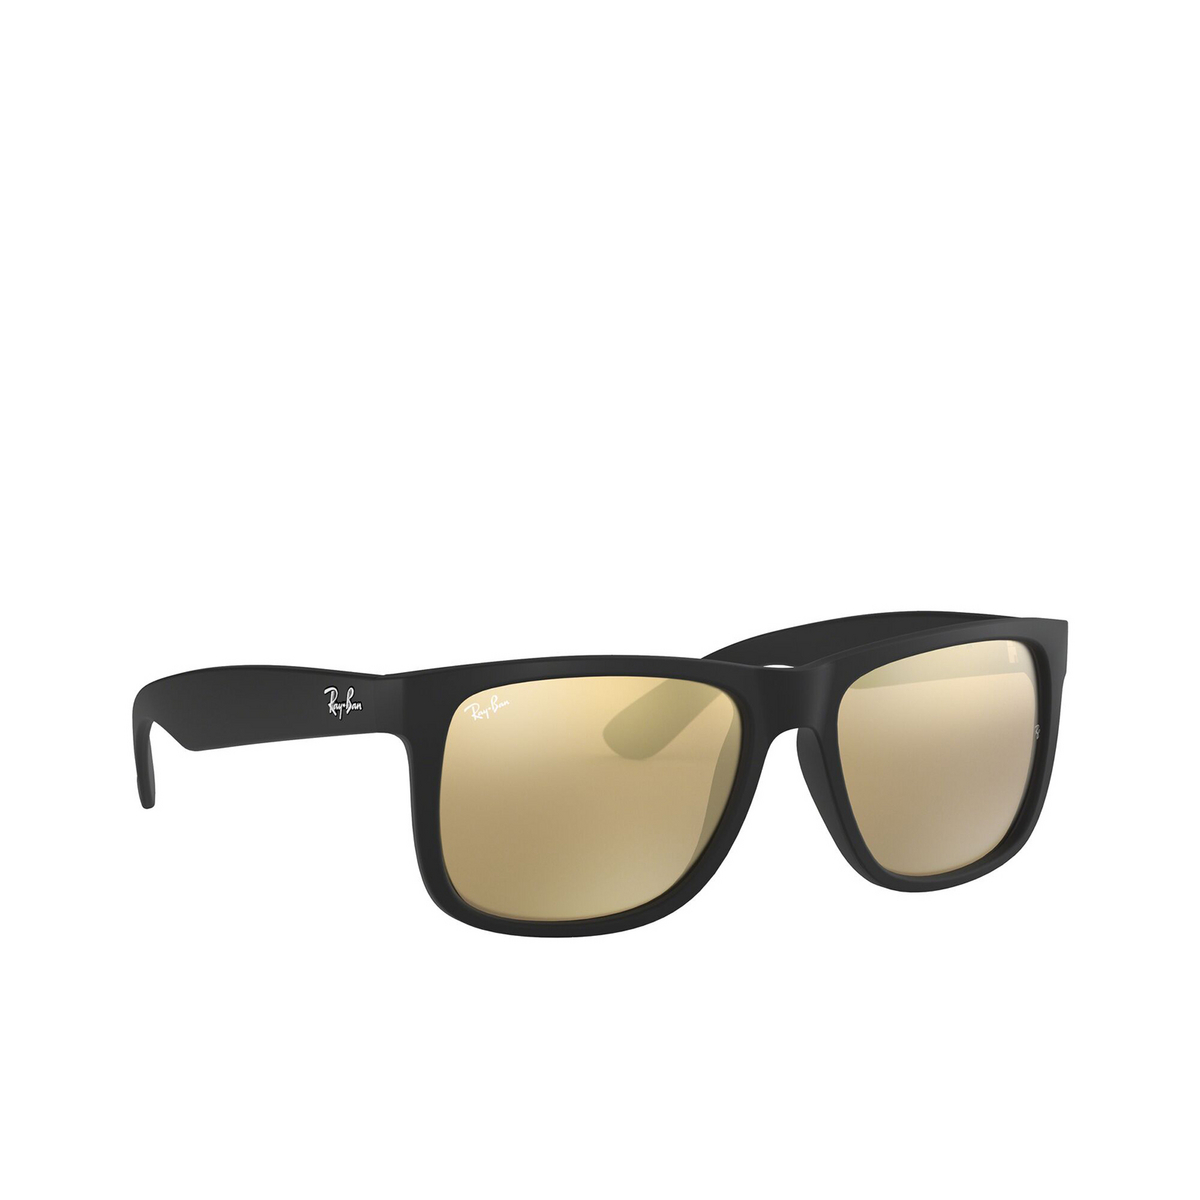 Ray-Ban® Square Sunglasses: Justin RB4165 color Rubber Black 622/5A - three-quarters view.